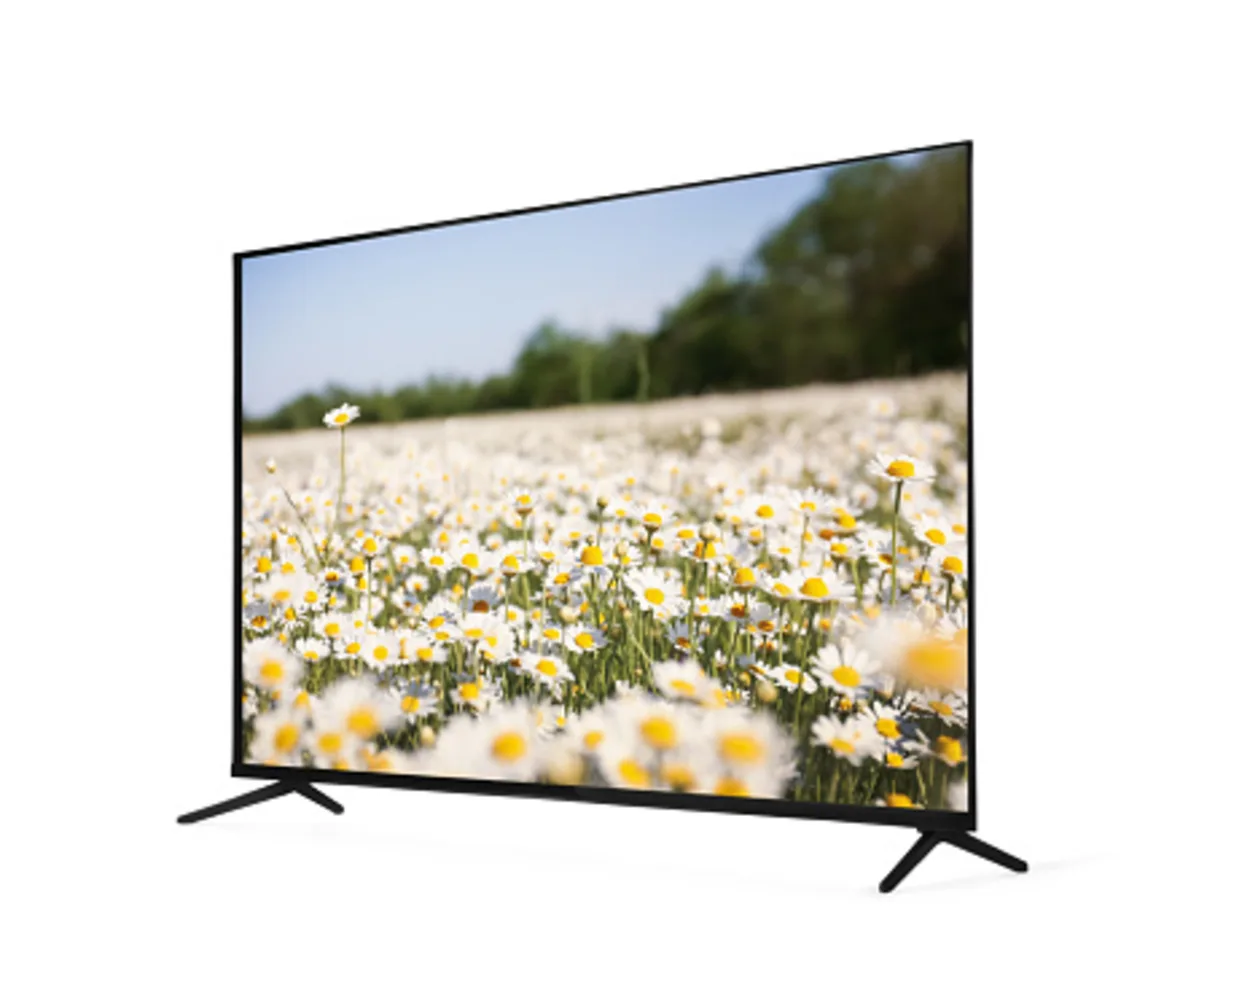 Modern wide-screen TV monitor showing beautiful chamomile flowers in a field isolated on white